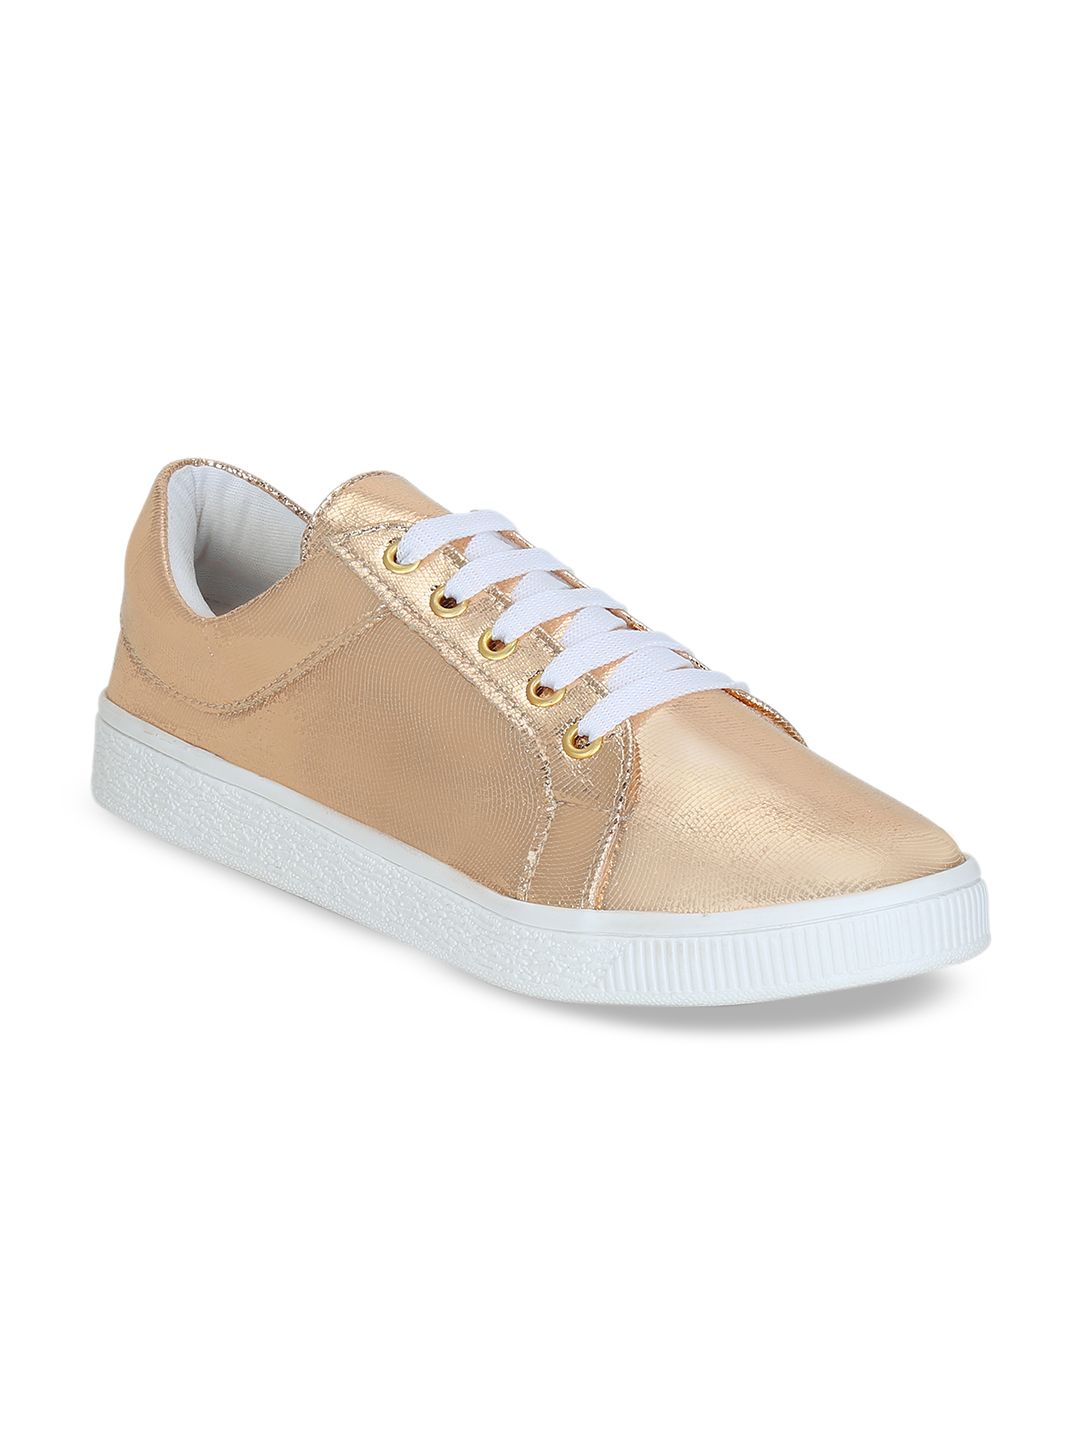 Get Glamr Women Solid Peach-Coloured Sneakers Price in India